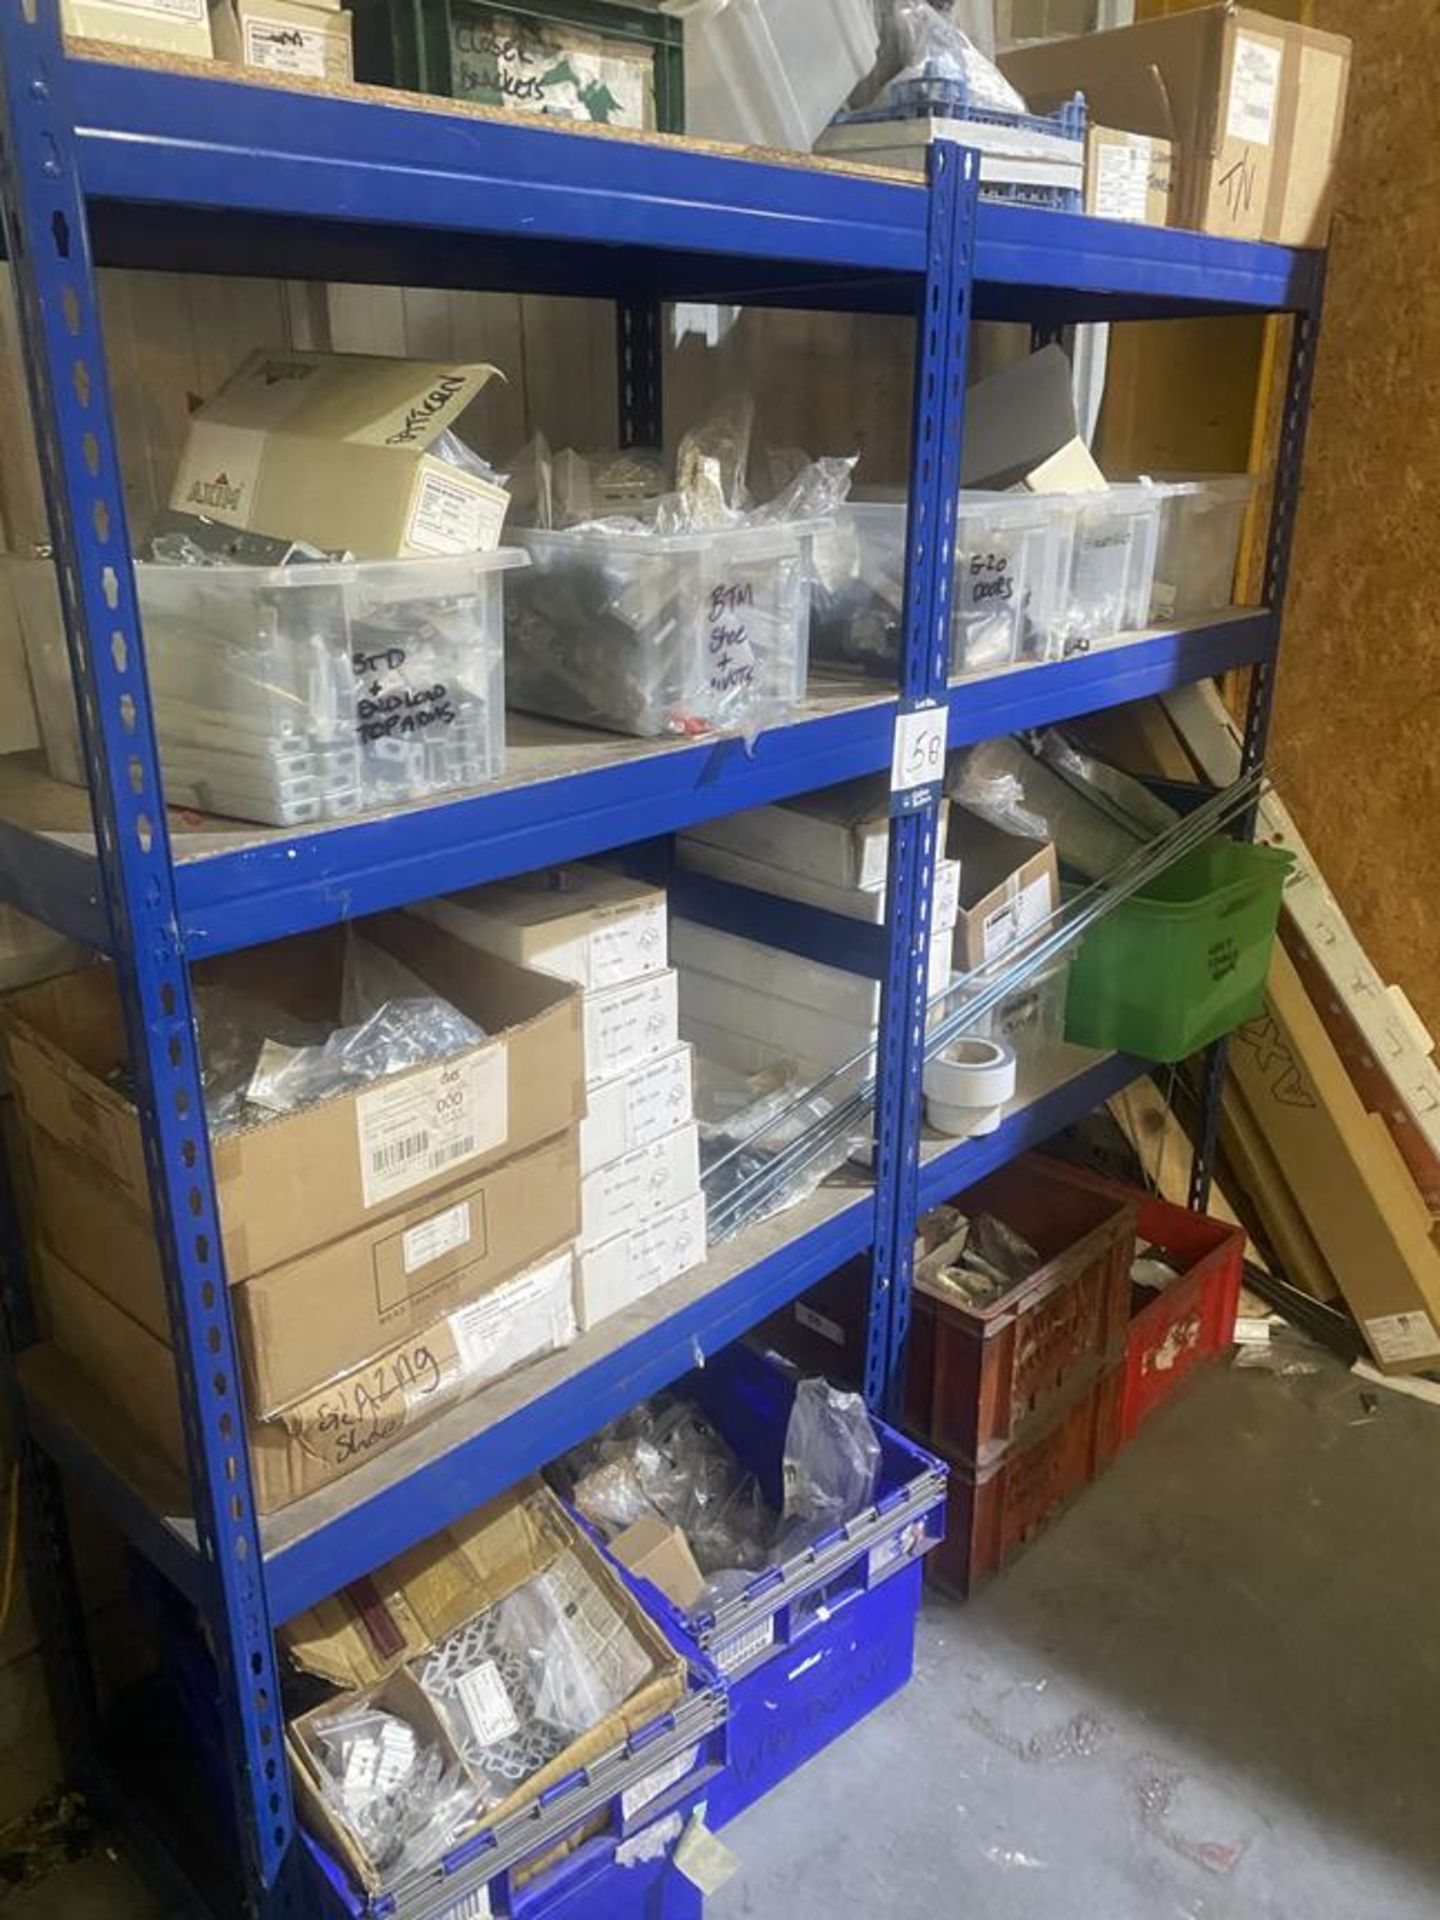 5 tier boltless shelf unit and contents